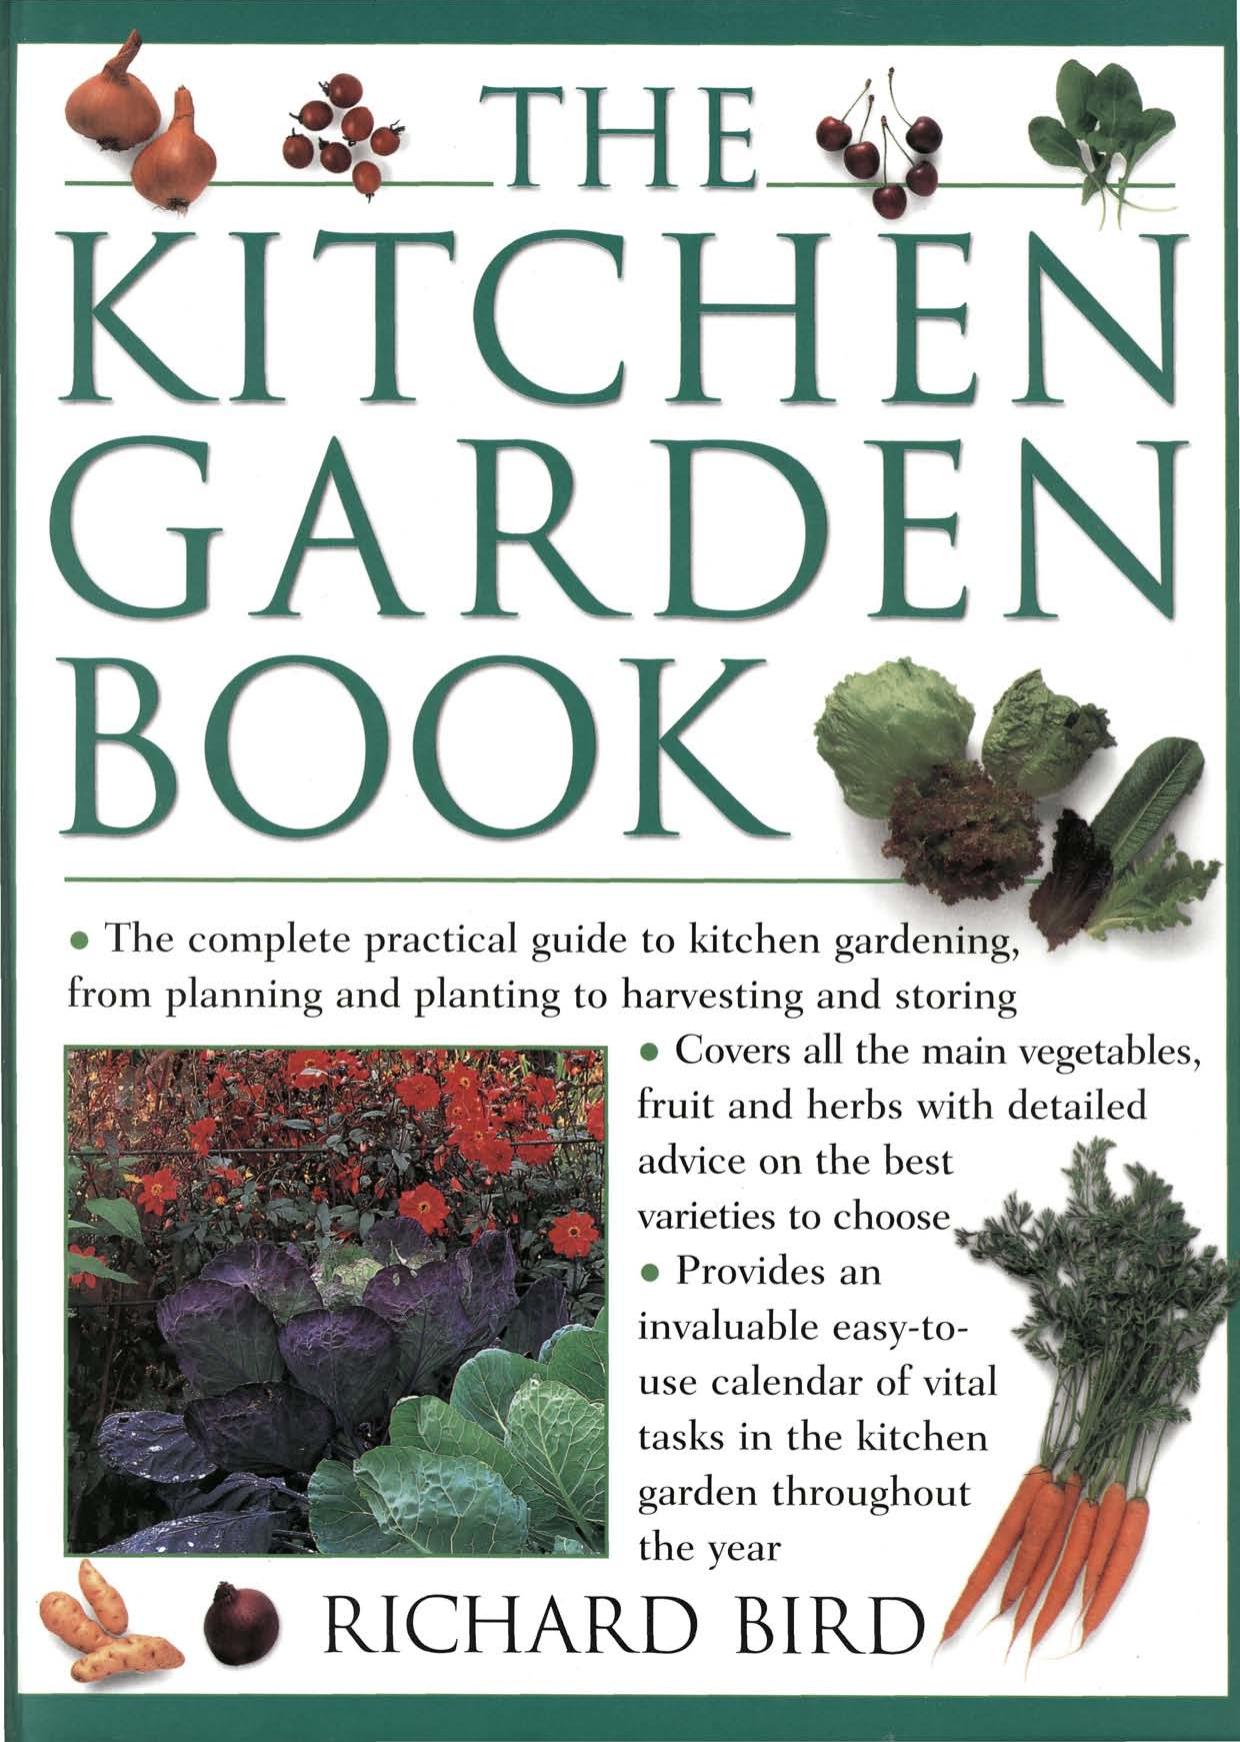 The Kitchen Garden Book The Complete Practical Guide to Kitchen Gardening, from Planning and Planting to Harvesting and Storing 1999